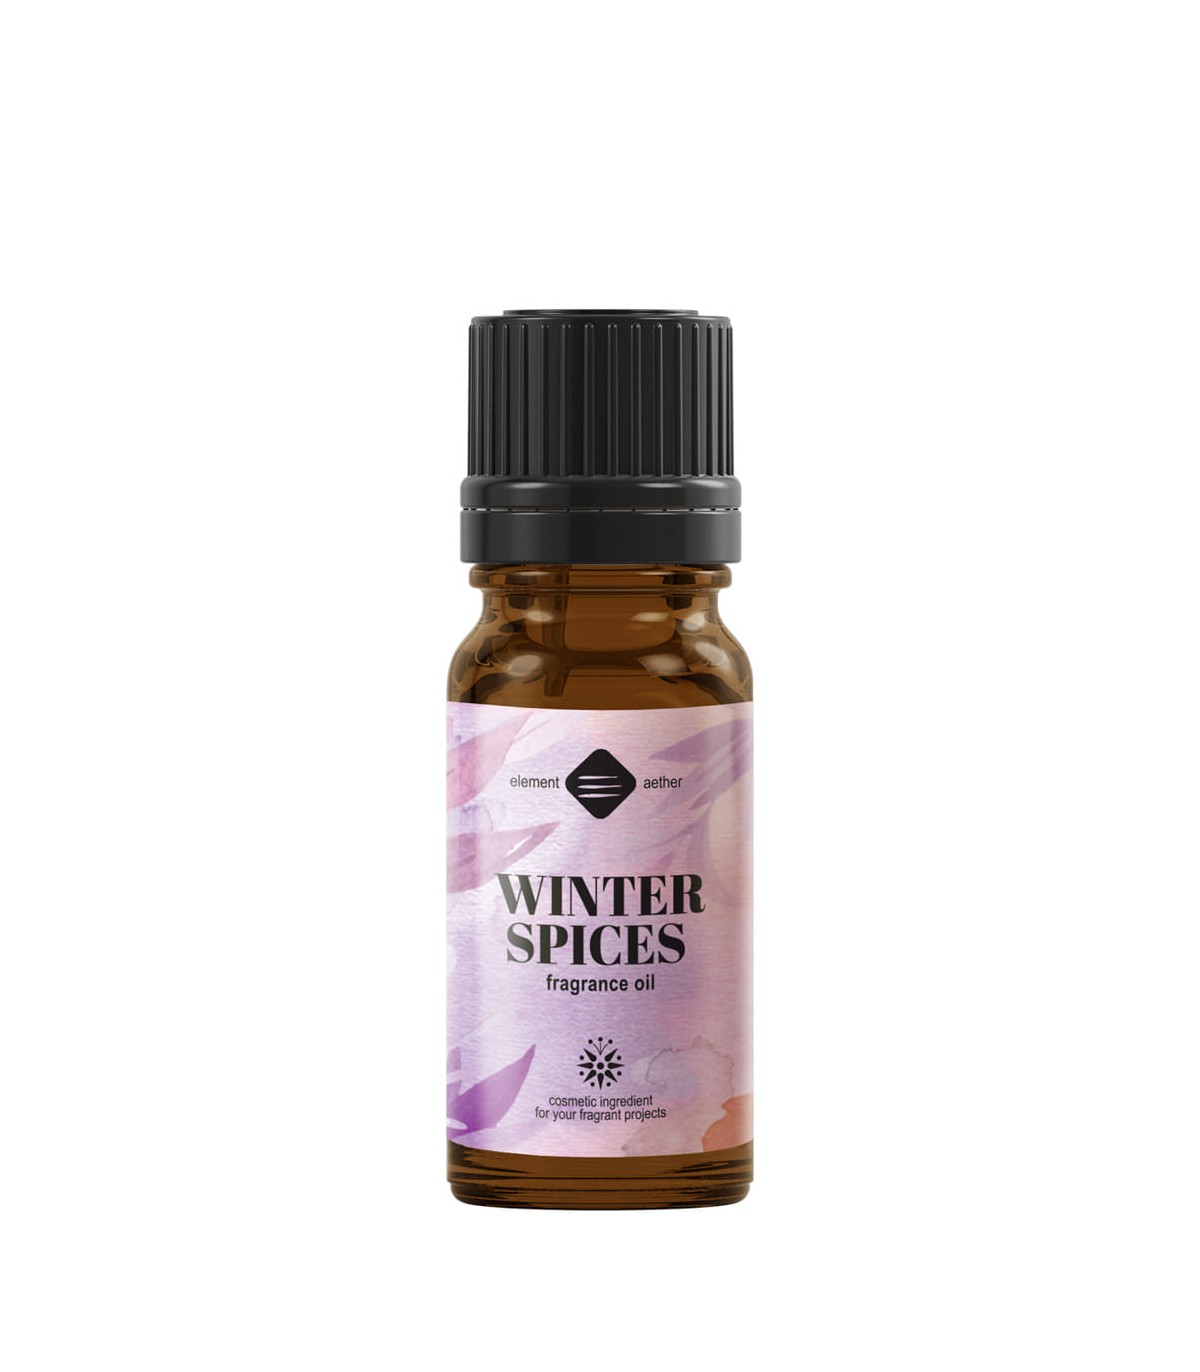 Winter Spices Fragrance oil